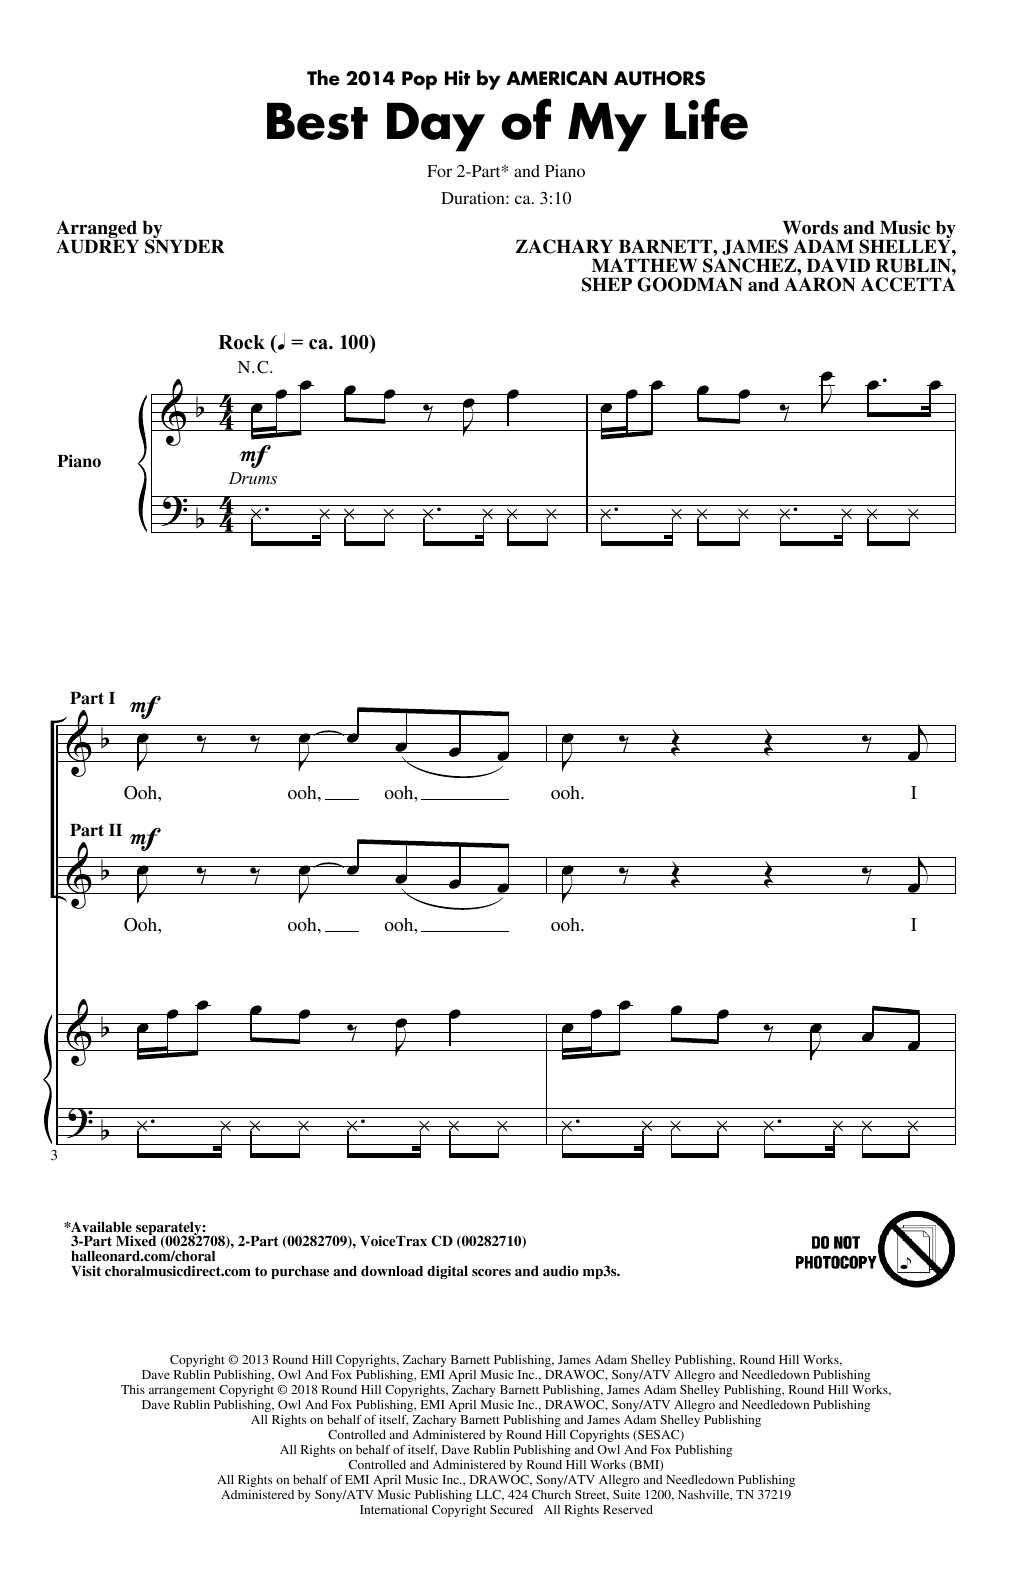 Download American Authors Best Day Of My Life (arr. Audrey Snyder Sheet Music